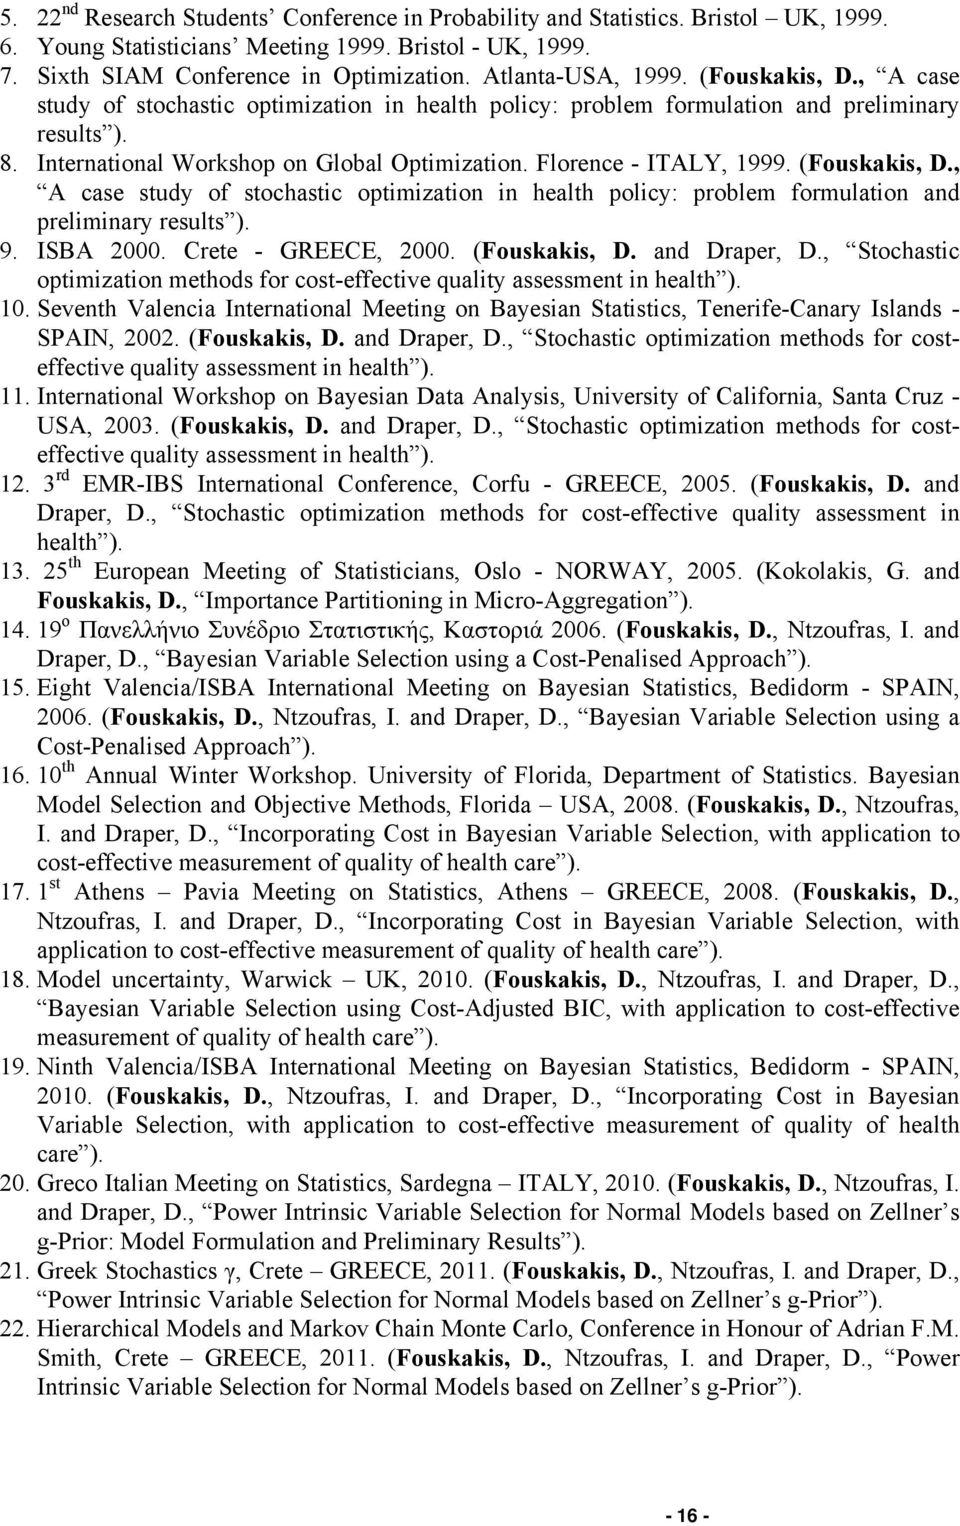 Florence - ITALY, 1999. (Fouskakis, D., A case study of stochastic optimization in health policy: problem formulation and preliminary results ). 9. ISBA 2000. Crete - GREECE, 2000. (Fouskakis, D. and Draper, D.